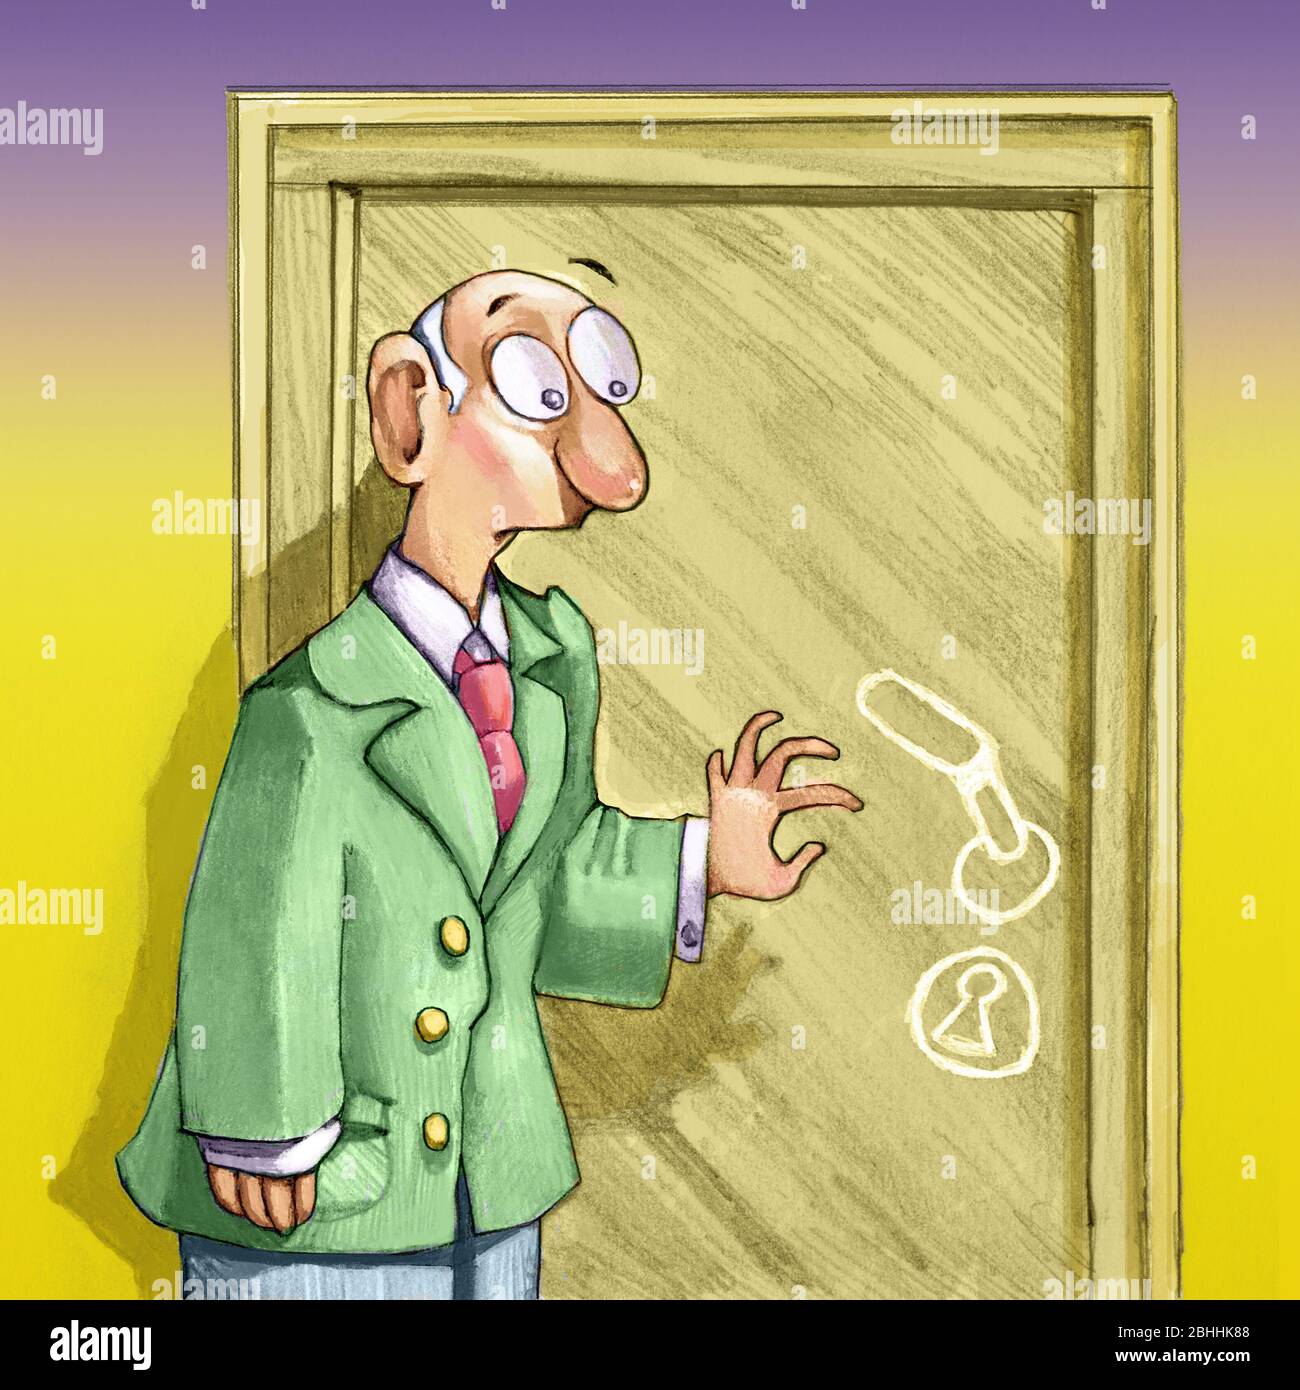 man with astonished expression fixes a door where the handle is not real but designed so he can not open it Stock Photo